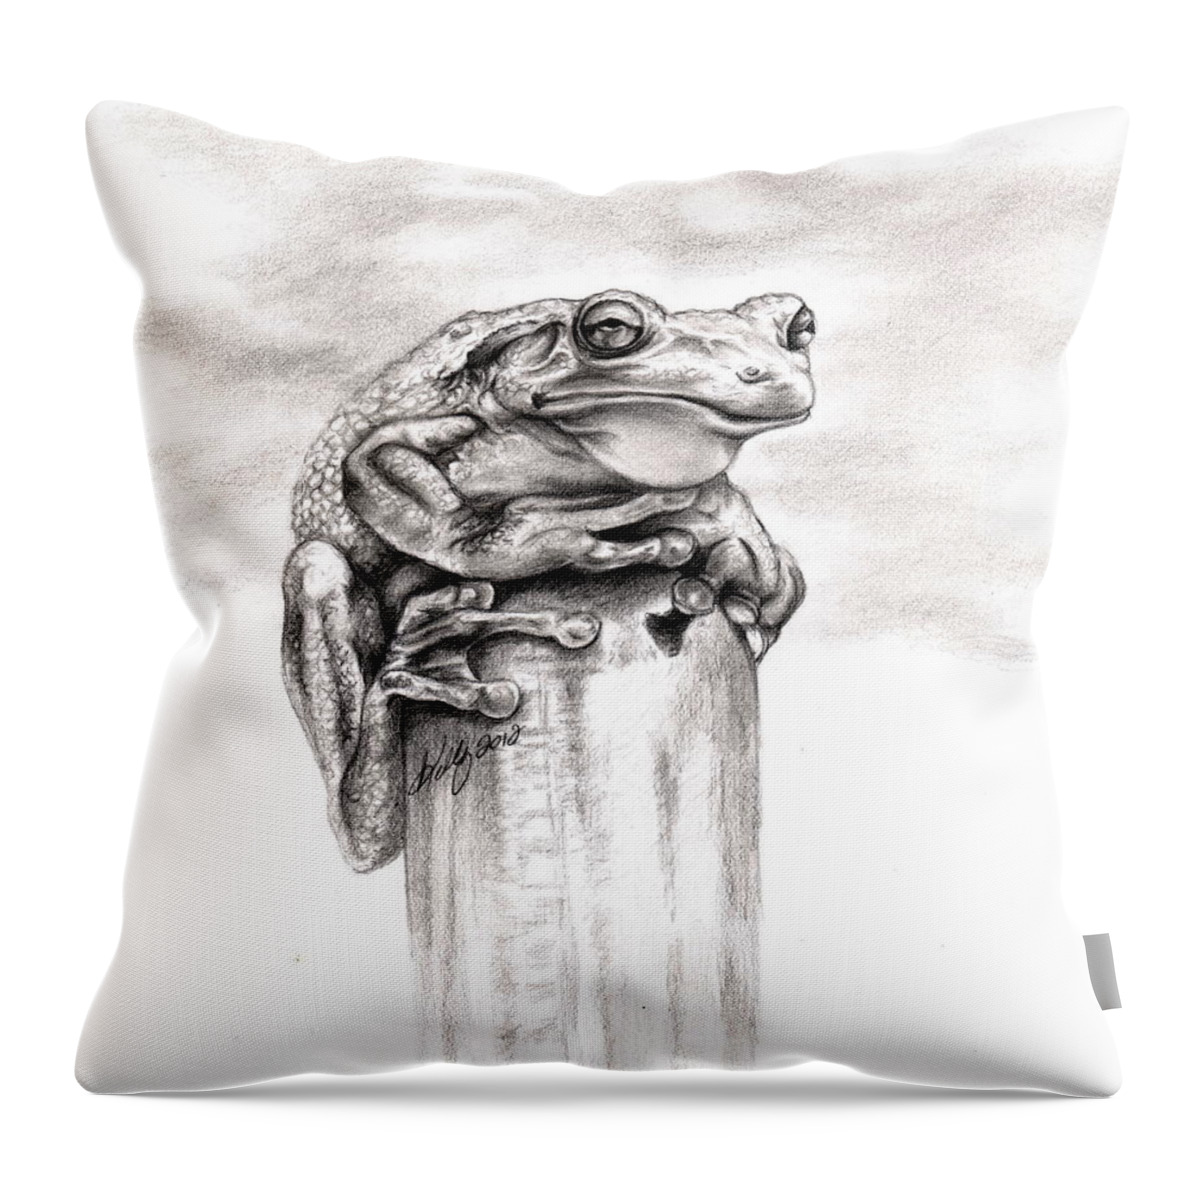 Frog Throw Pillow featuring the drawing Batting Coach by Kathleen Kelly Thompson